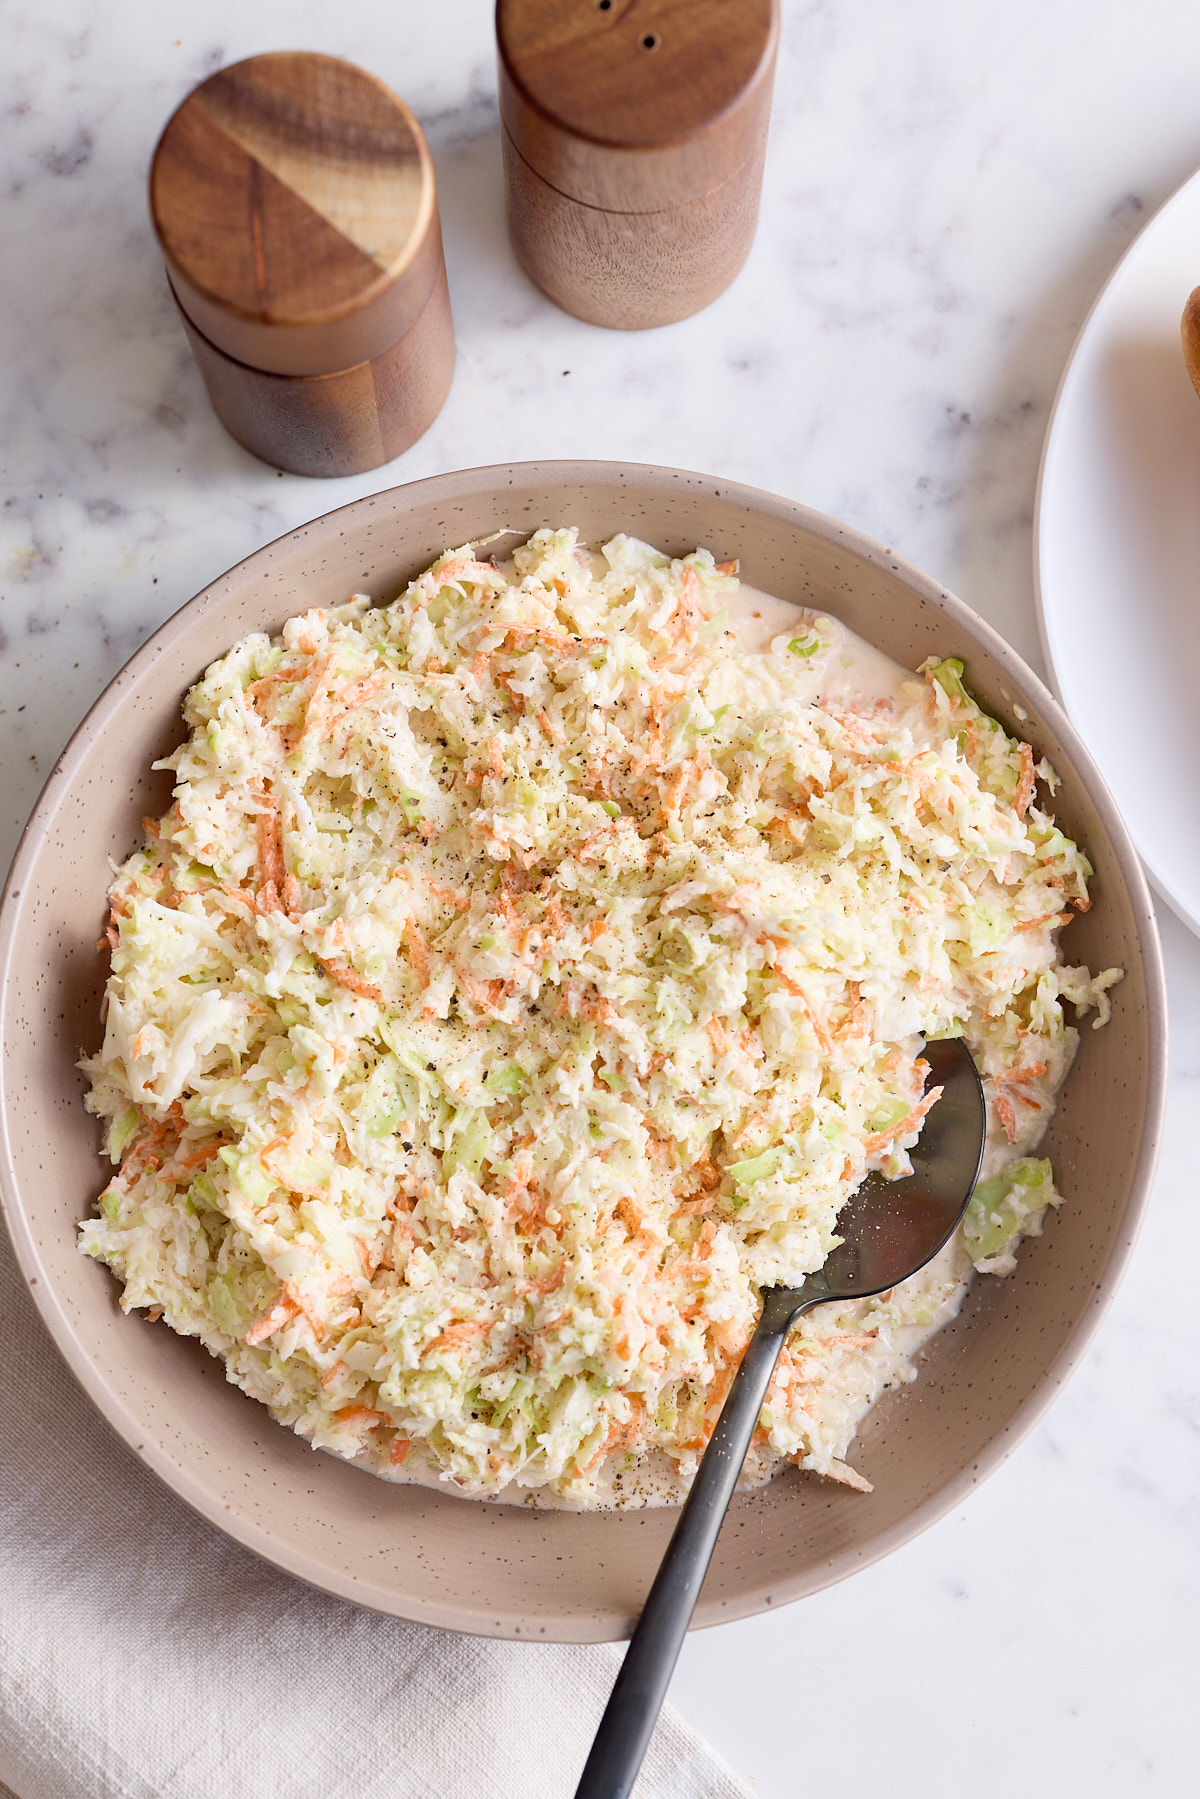 southern coleslaw in bowl with spoon sticking out